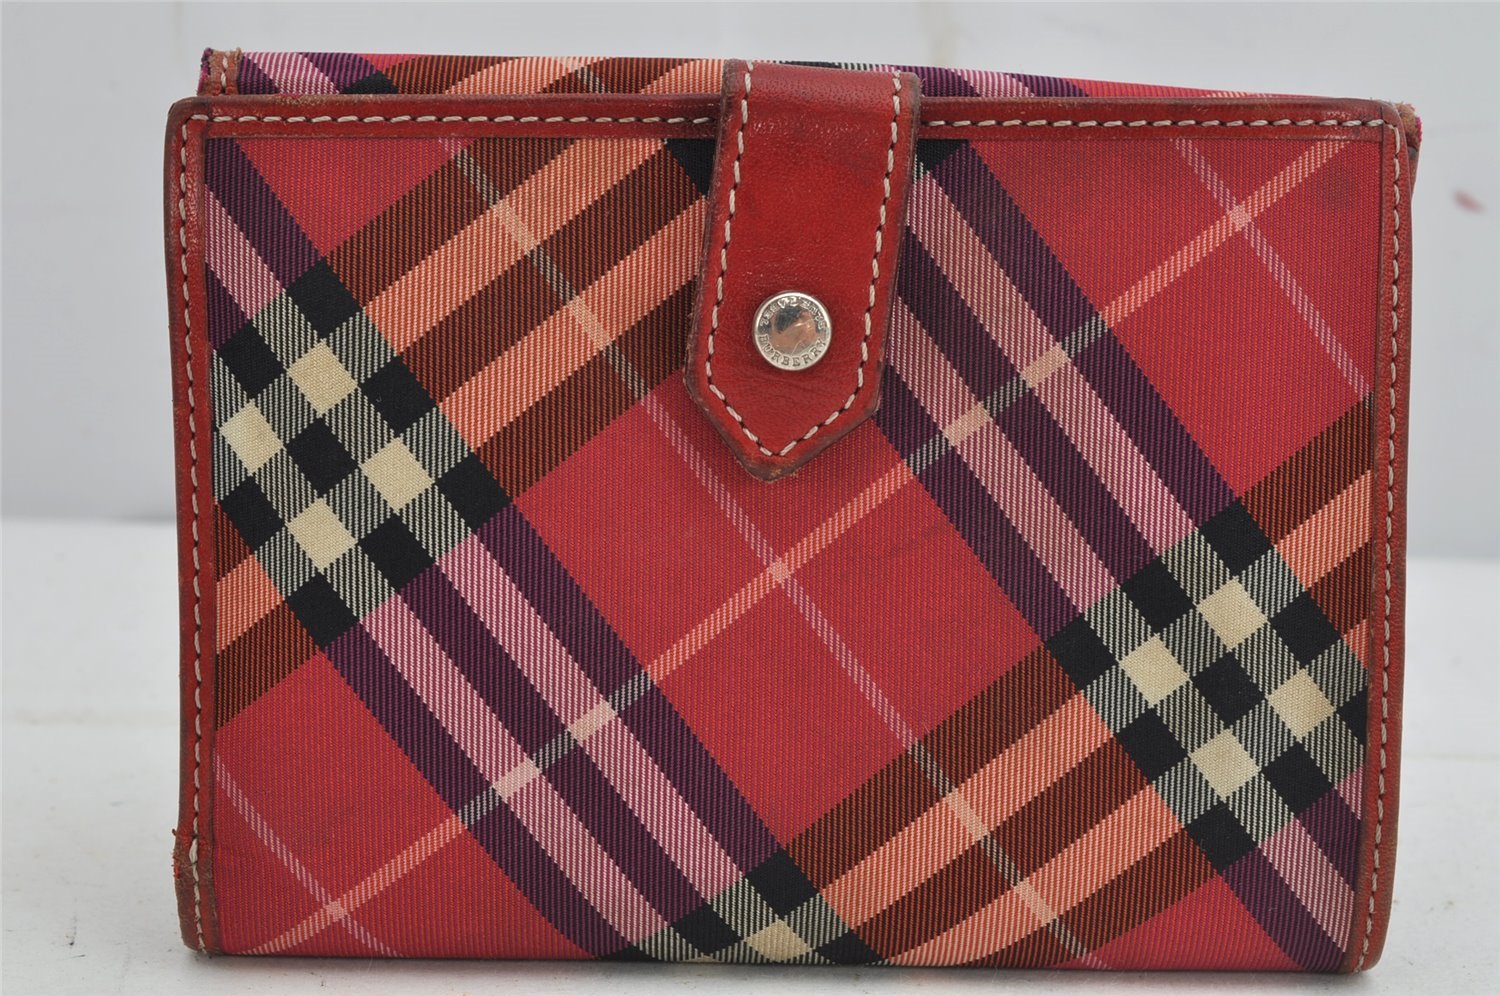 Authentic BURBERRY BLUE LABEL Check Bifold Wallet Purse Nylon Leather Red 9306J